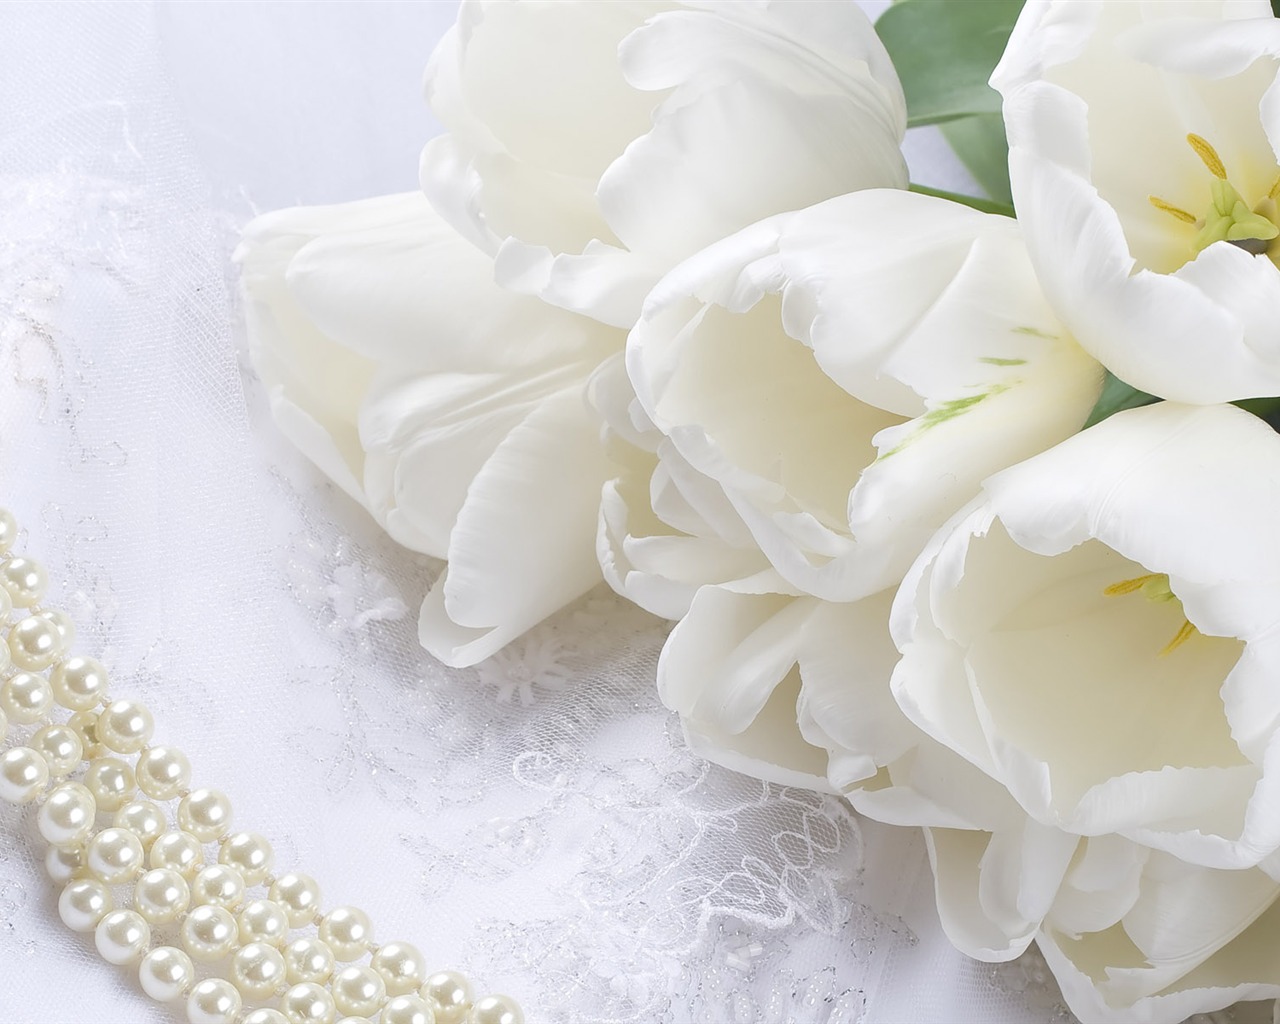 Weddings and Flowers wallpaper (1) #3 - 1280x1024